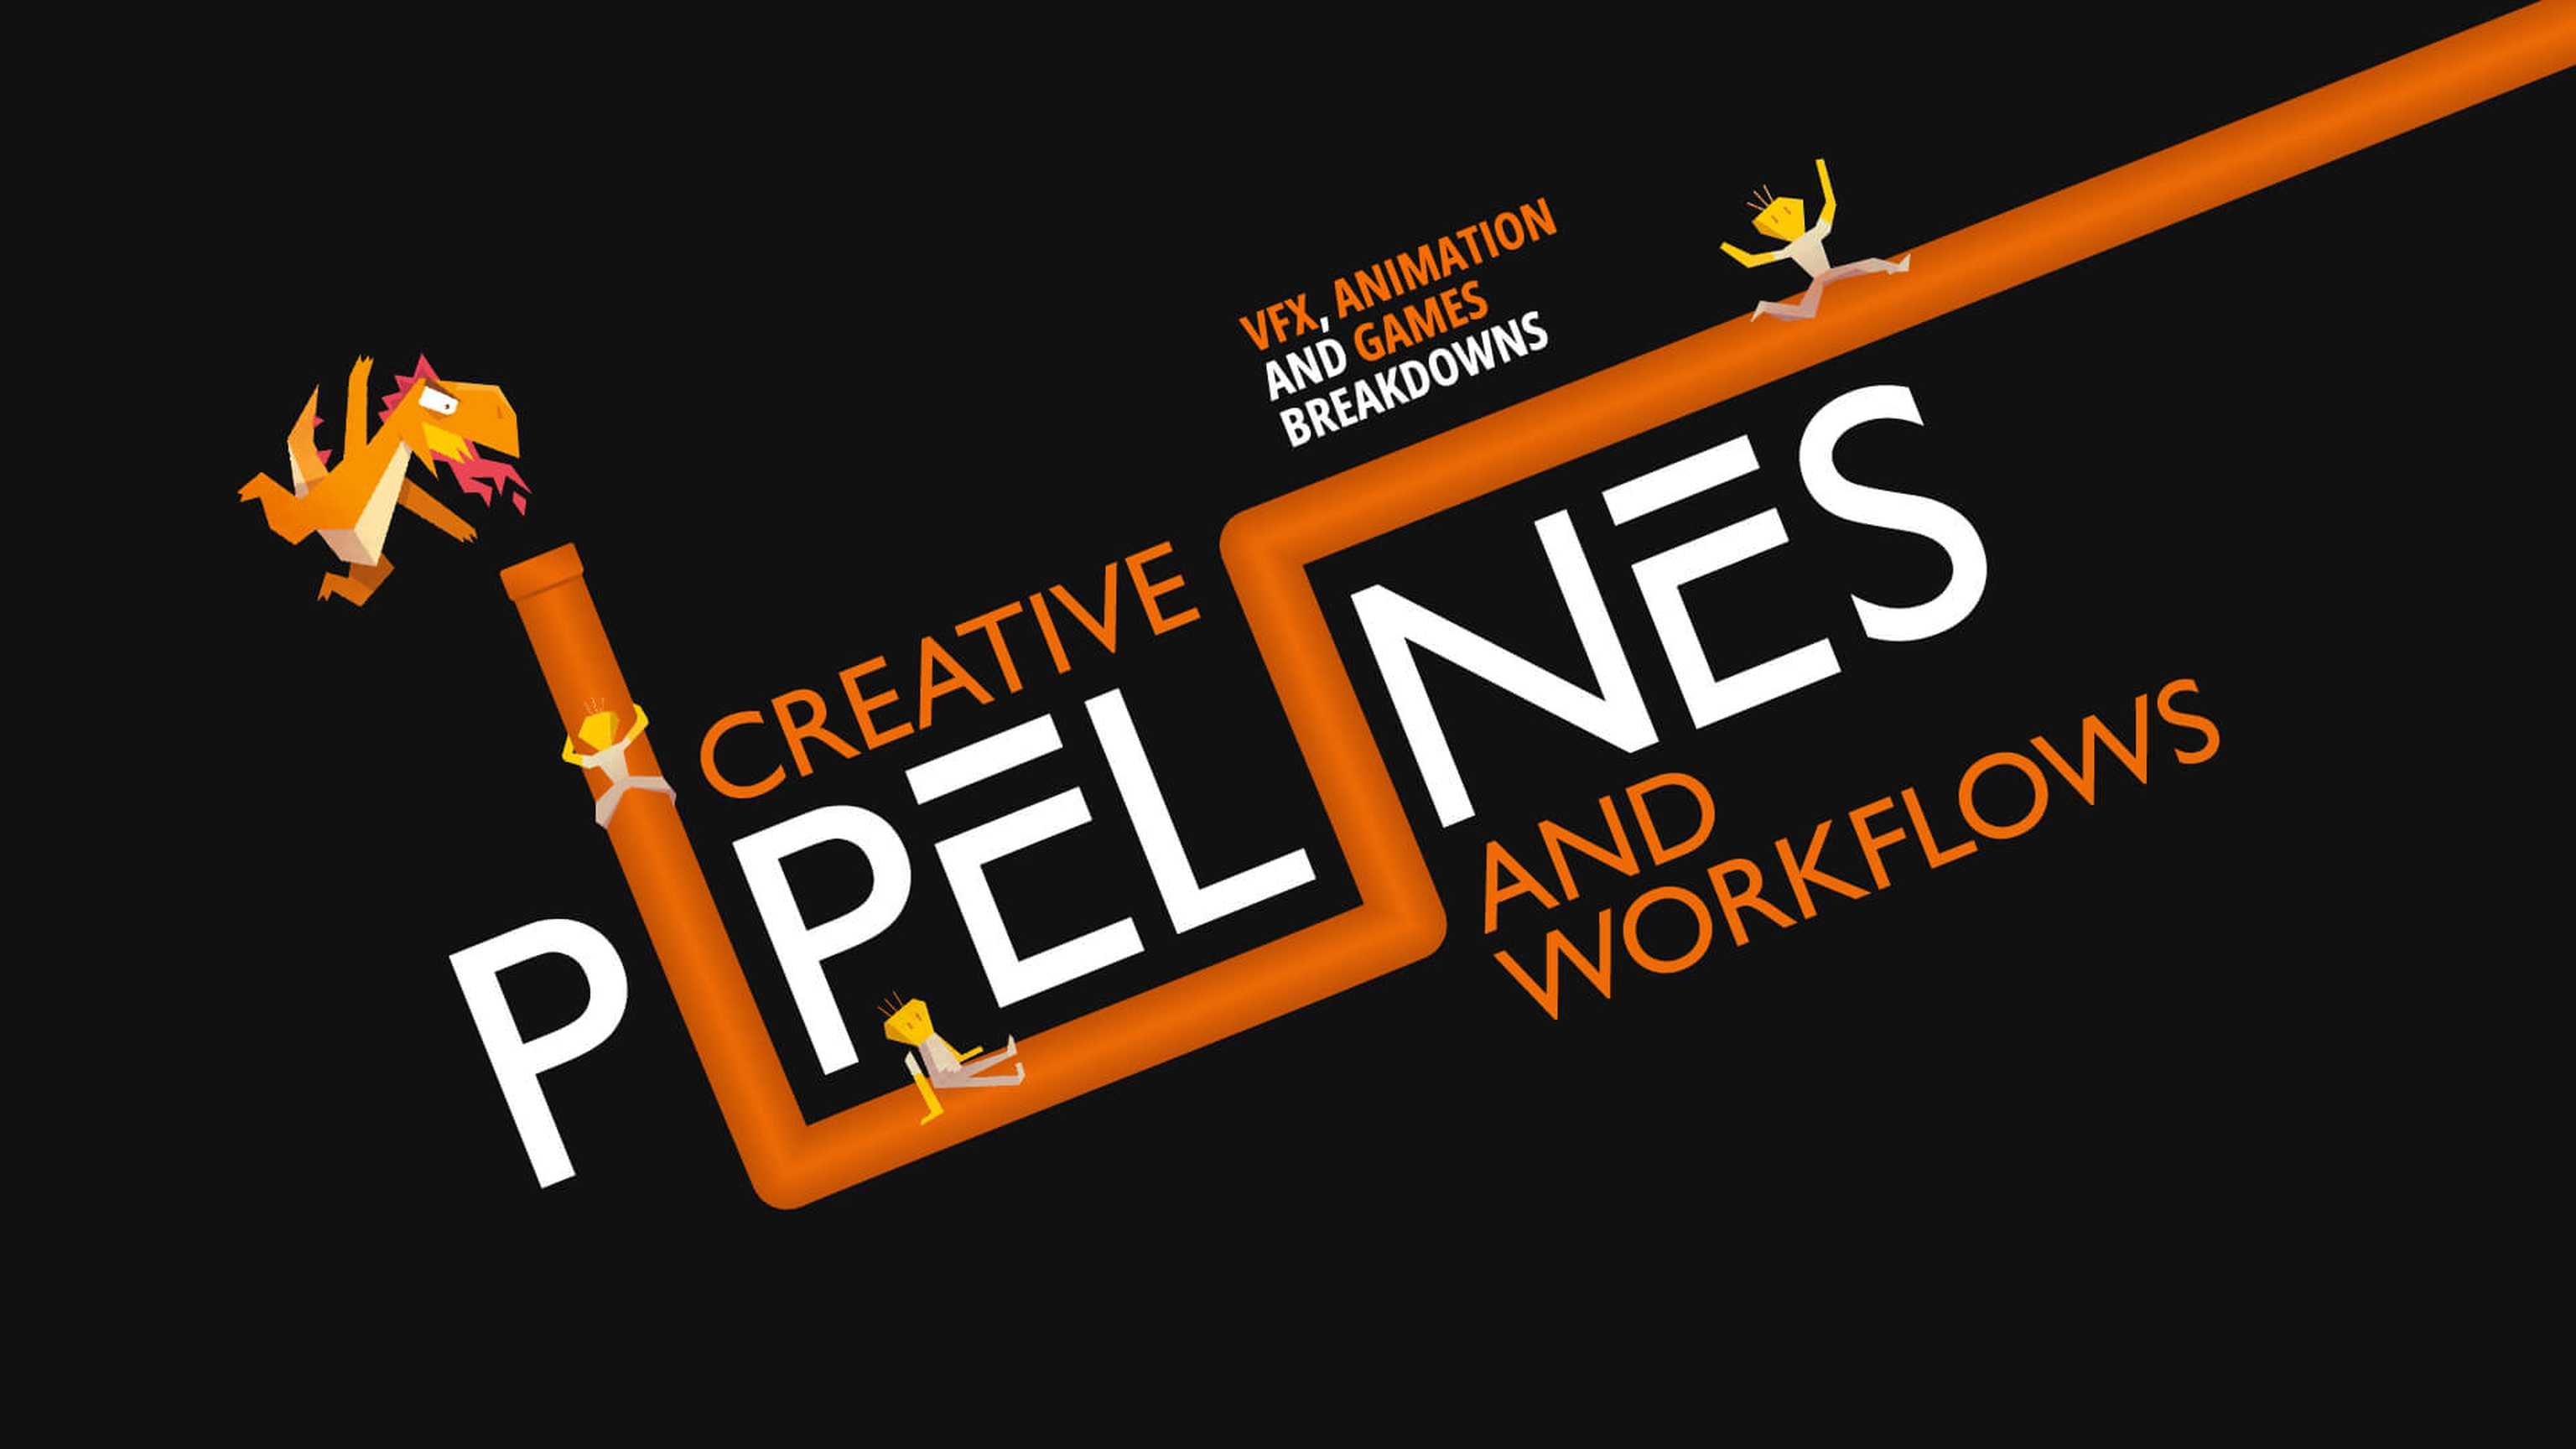 The Creative Pipelines and Workflows logo on a black background